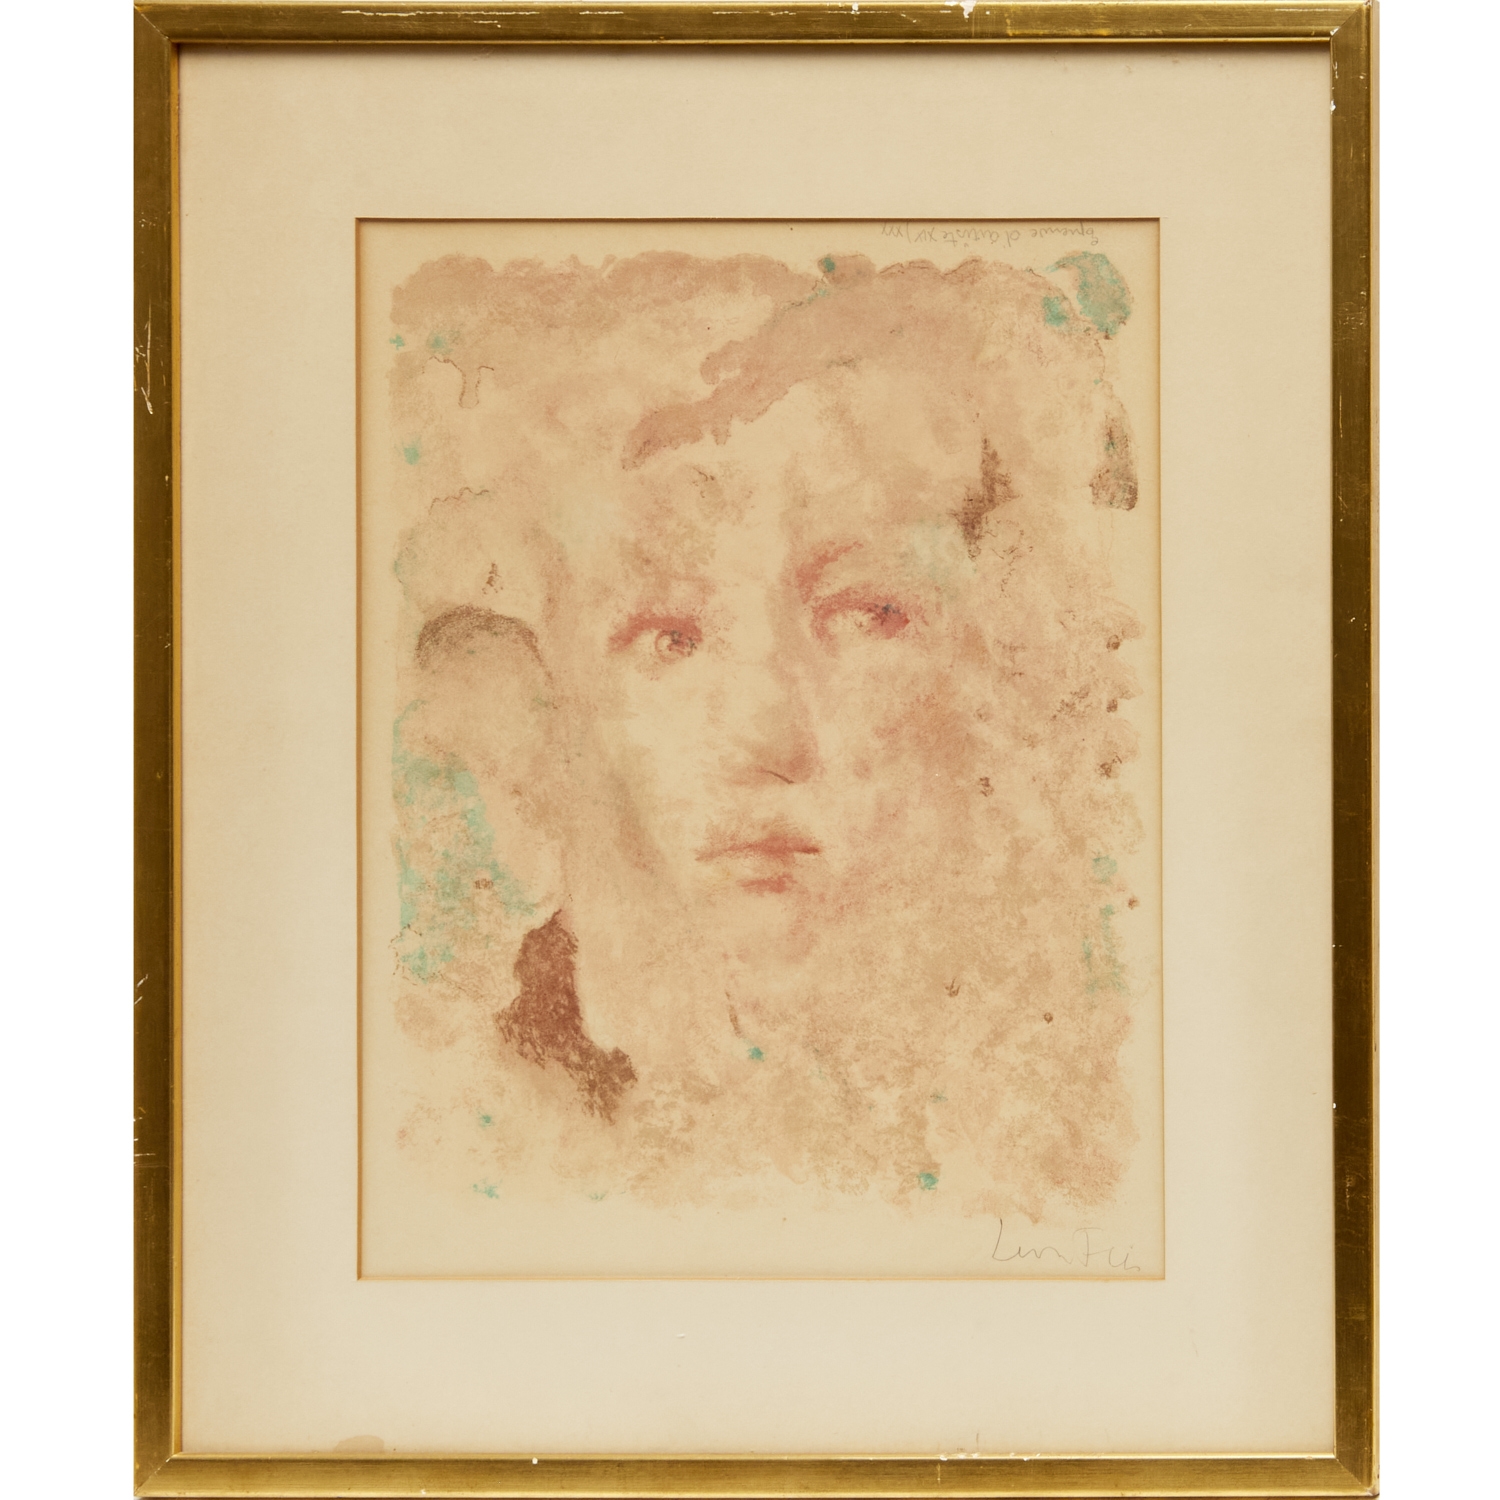 Artwork by Leonor Fini, Portrait of a Young Woman, Made of lithograph